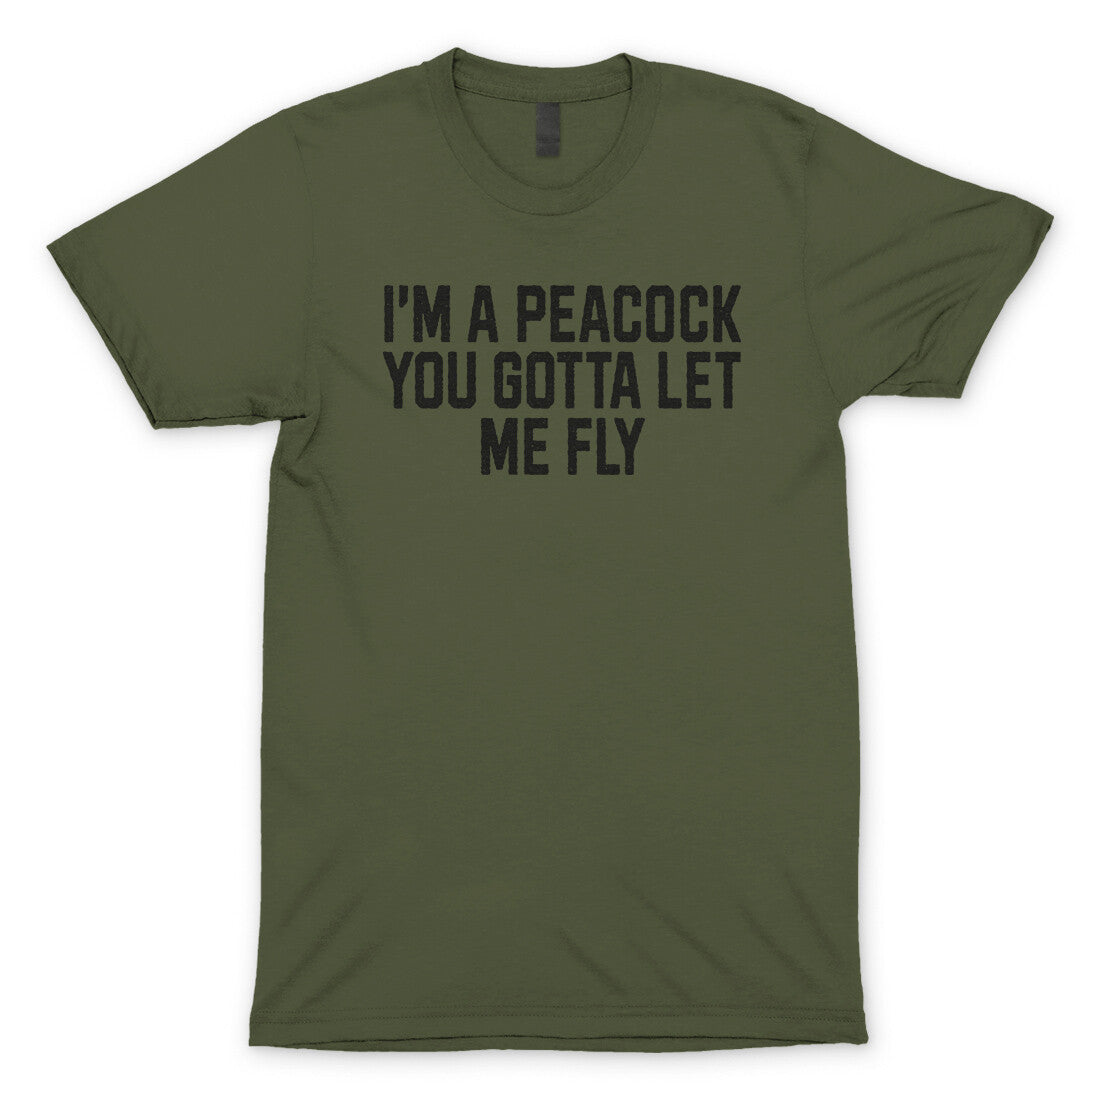 I'm a Peacock You Gotta Let me Fly in Military Green Color